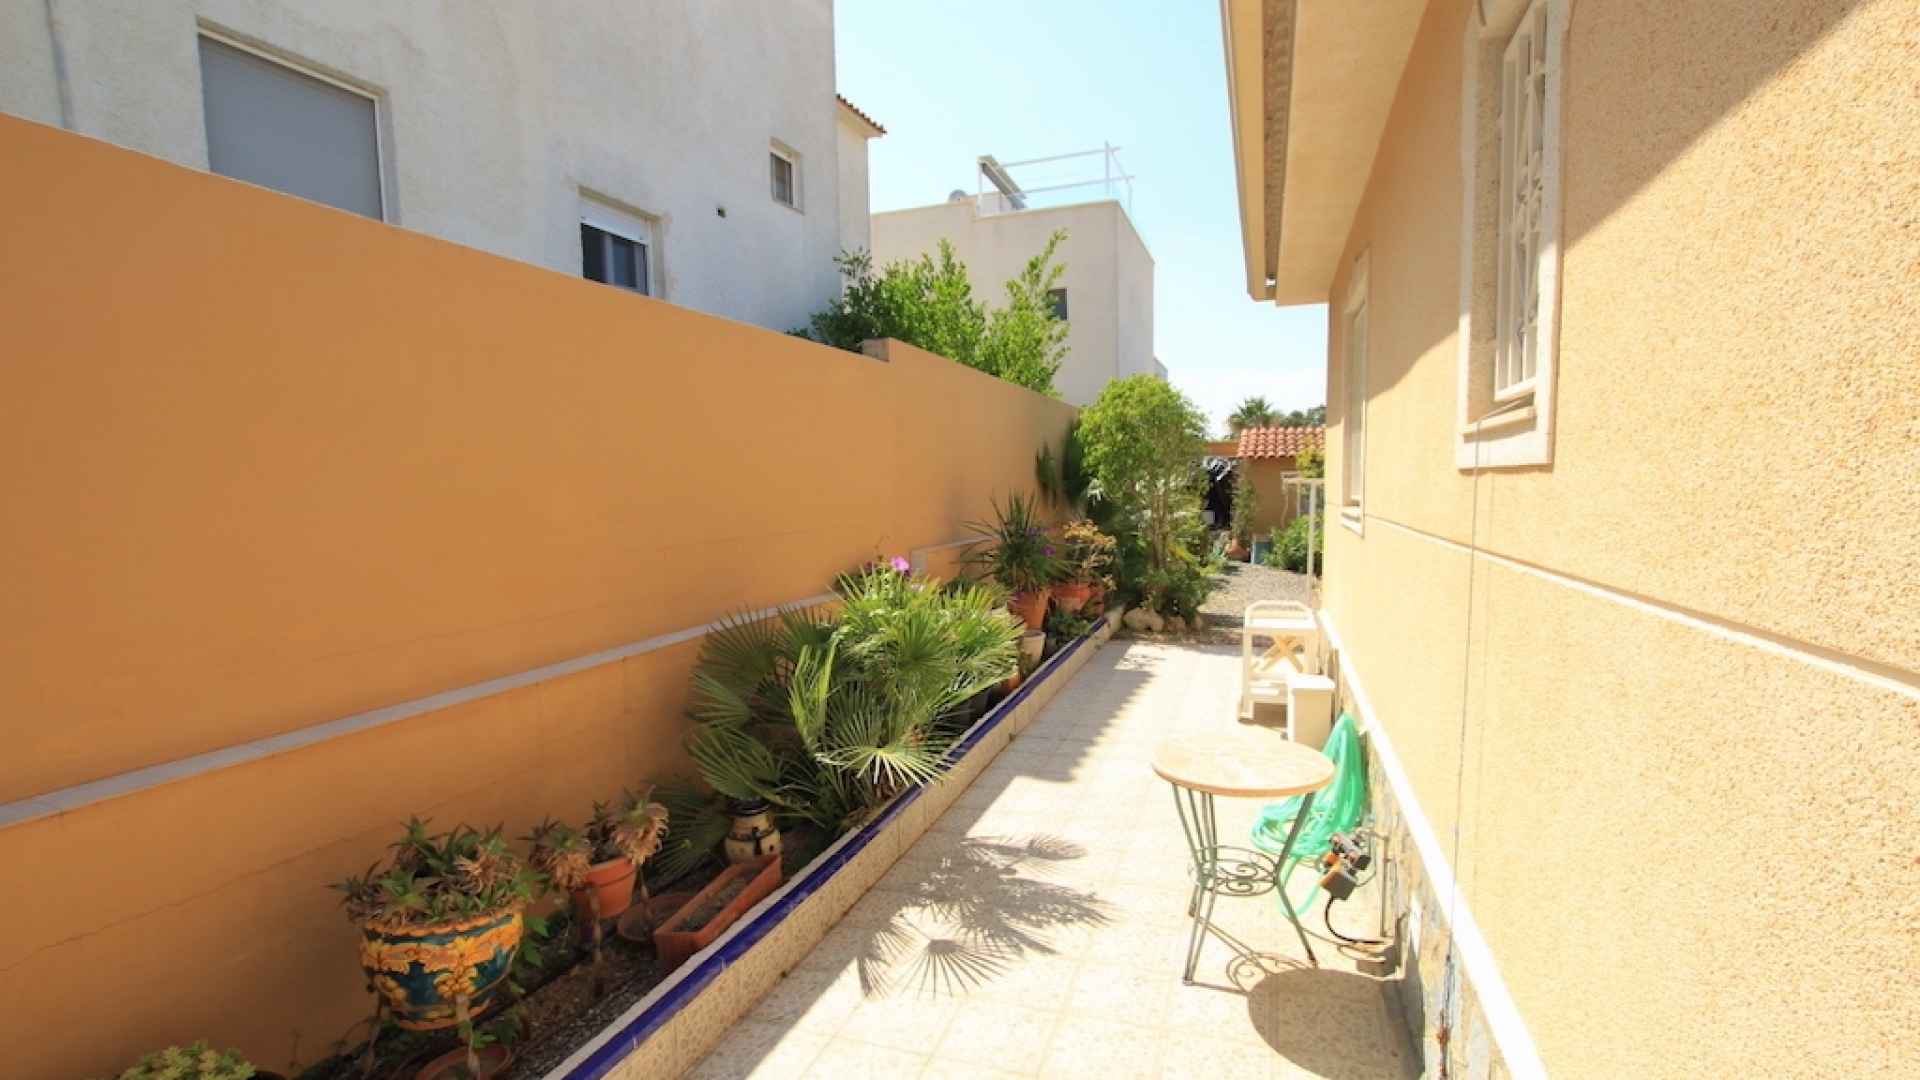 48133_spacious_210sqm_detached_villa_with_internal_garage___private_pool_260623093700_img_5860